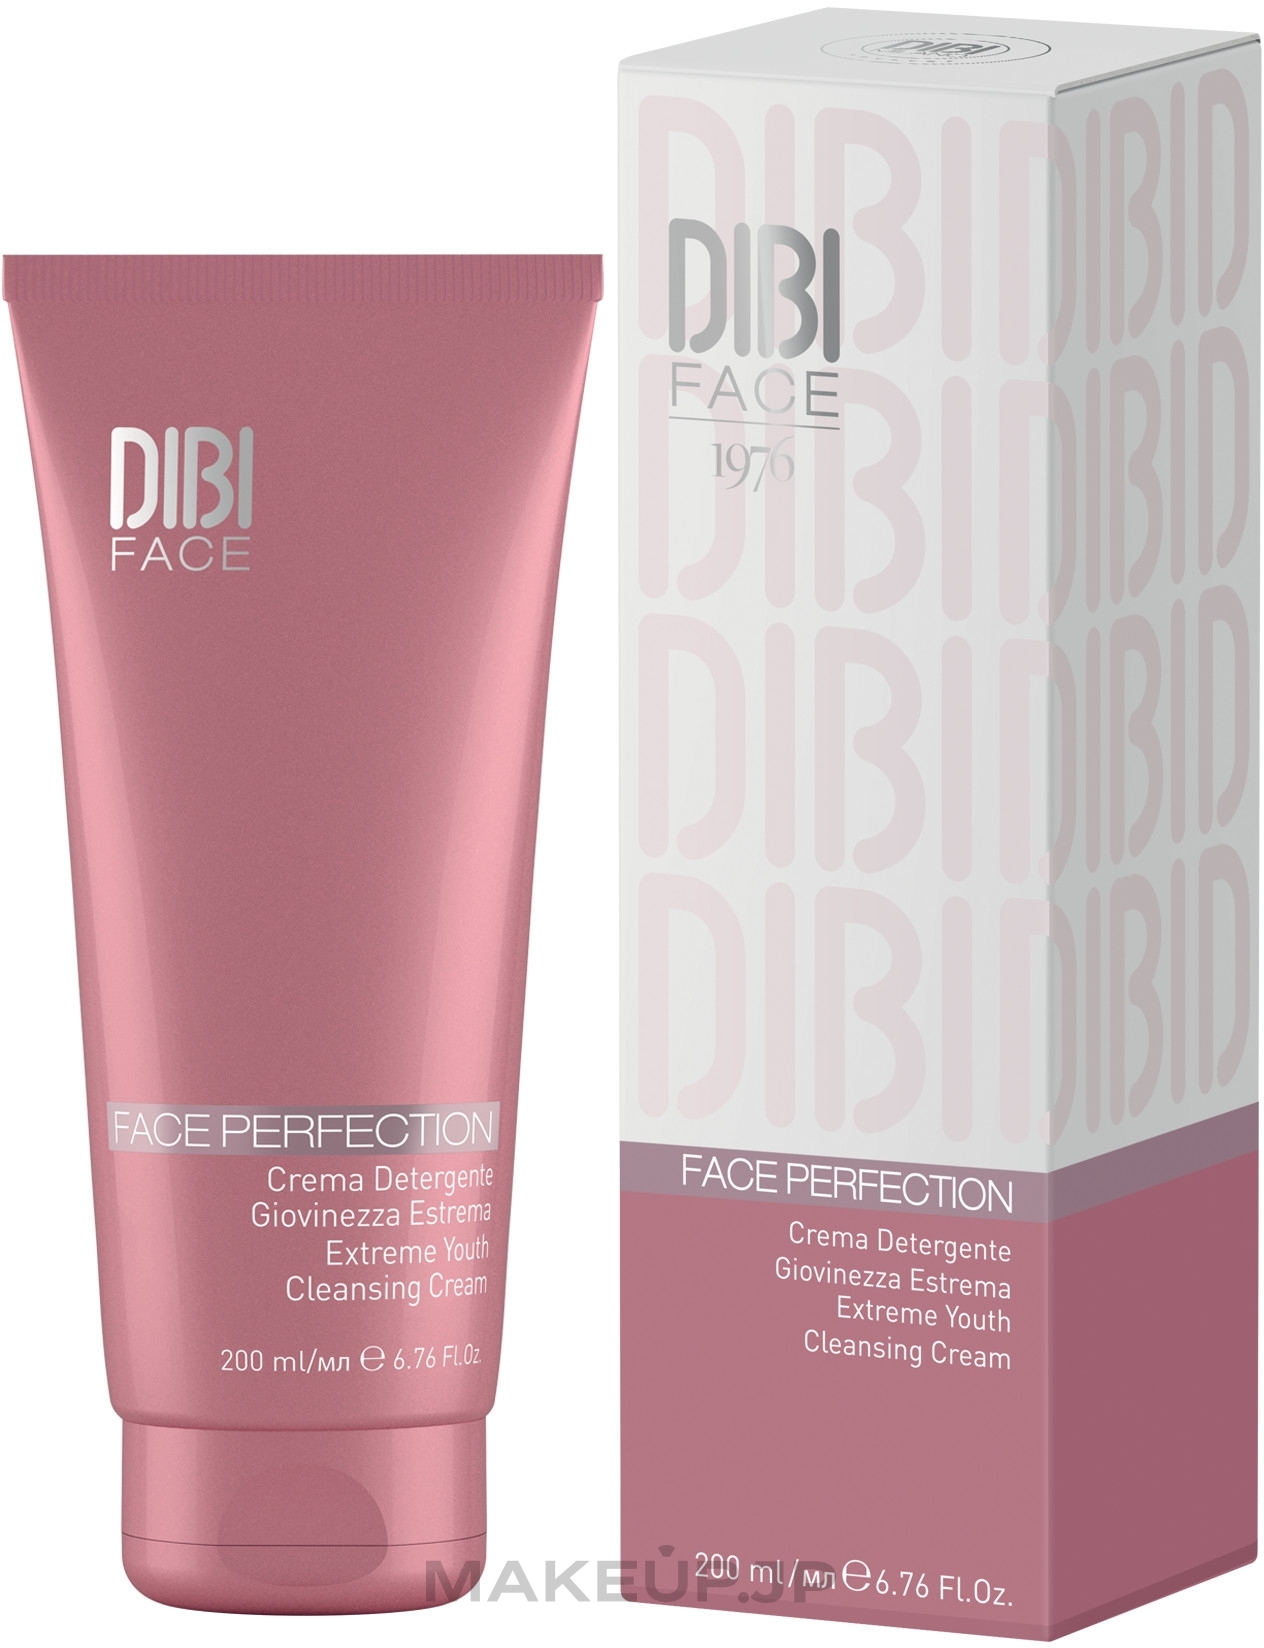 Extreme Youth Cleansing Cream - DIBI Milano Face Perfection — photo 200 ml